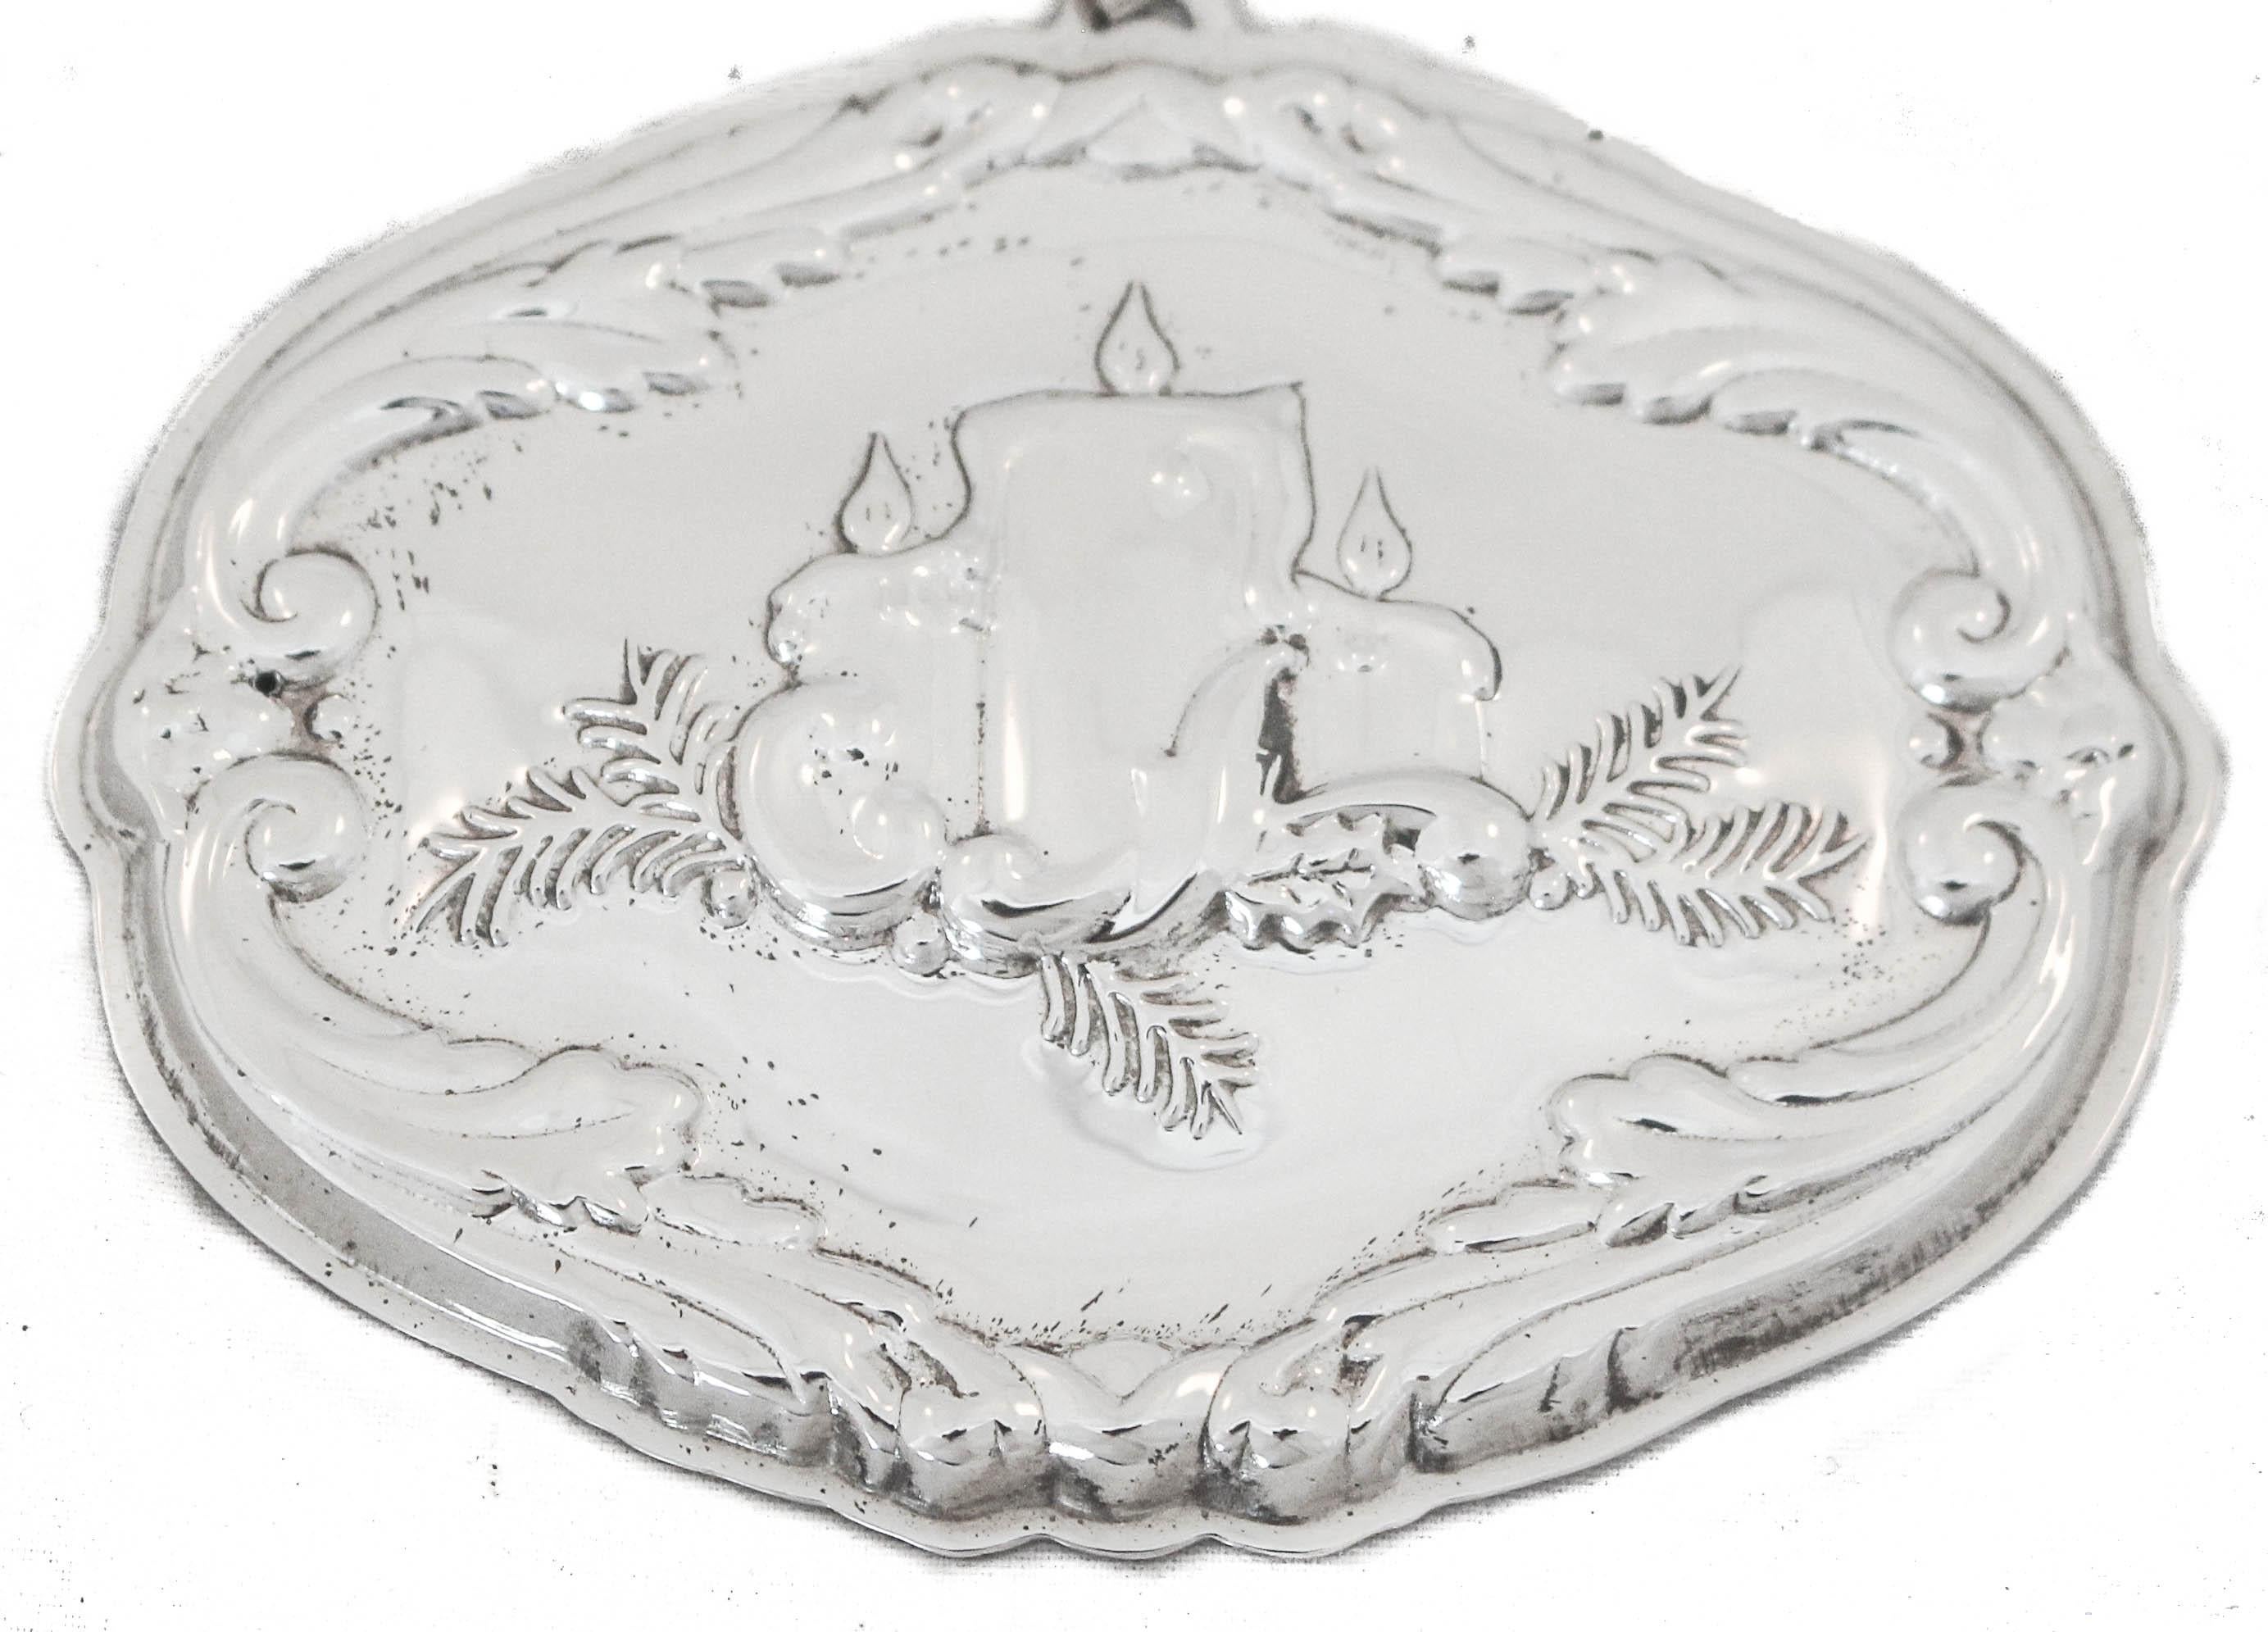 We are happy to offer you this sterling silver Christmas ornament in the Francis I pattern by Reed and Barton. The rim is scalloped with an ornate border. On one side three candles burn with Yule branches surrounding them. On the other side, it’s